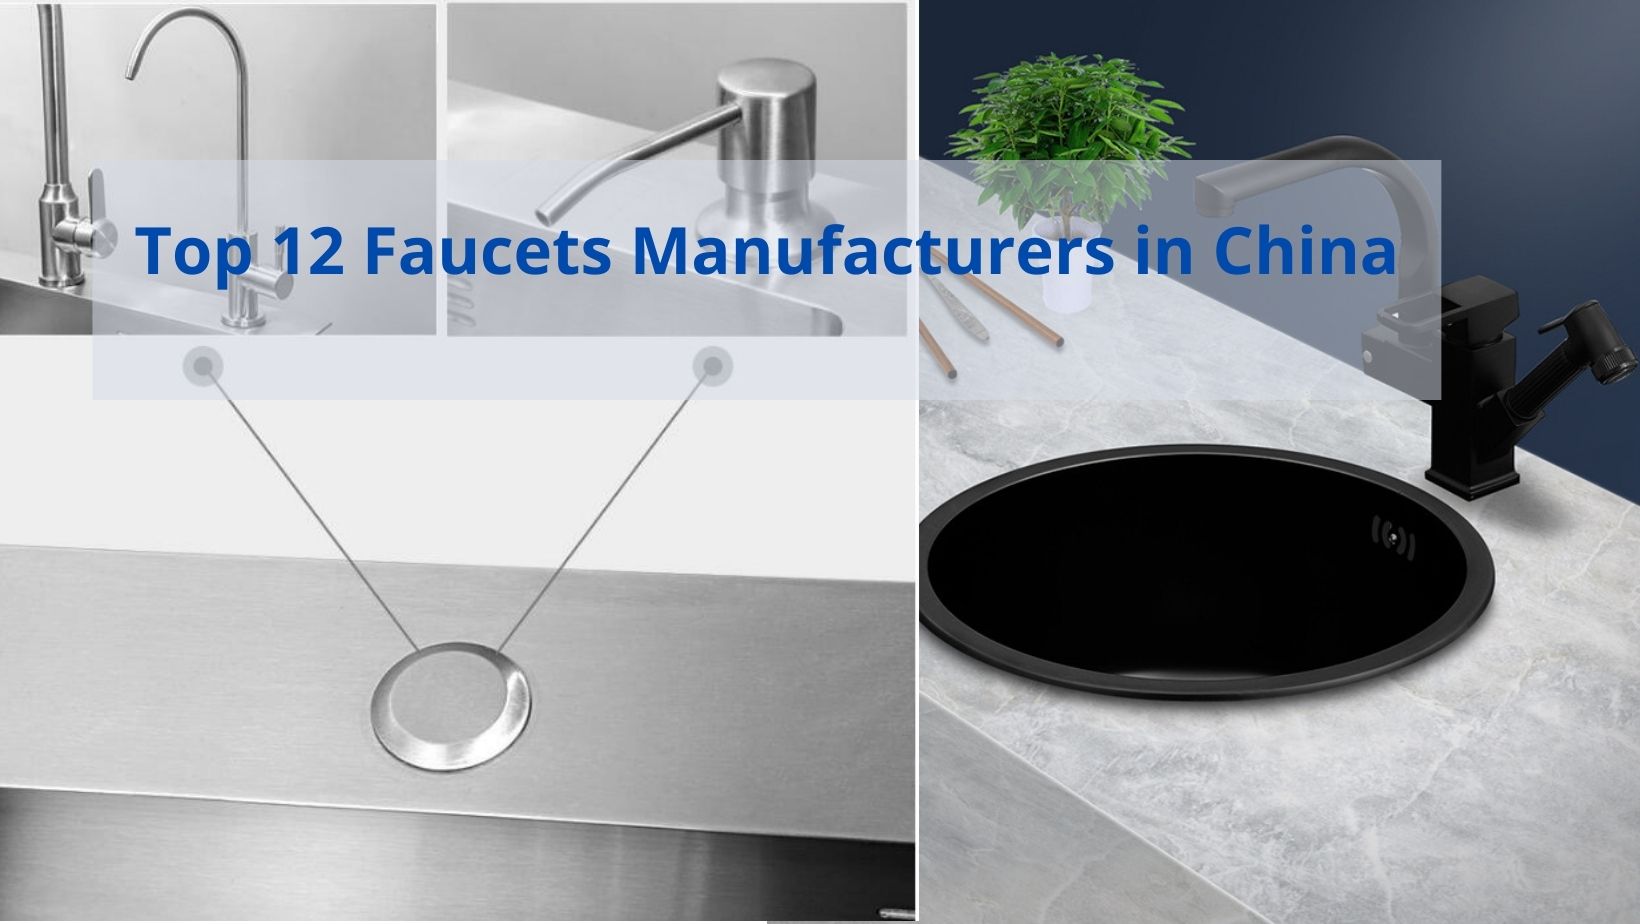 Top 12 Faucets Manufacturers in China